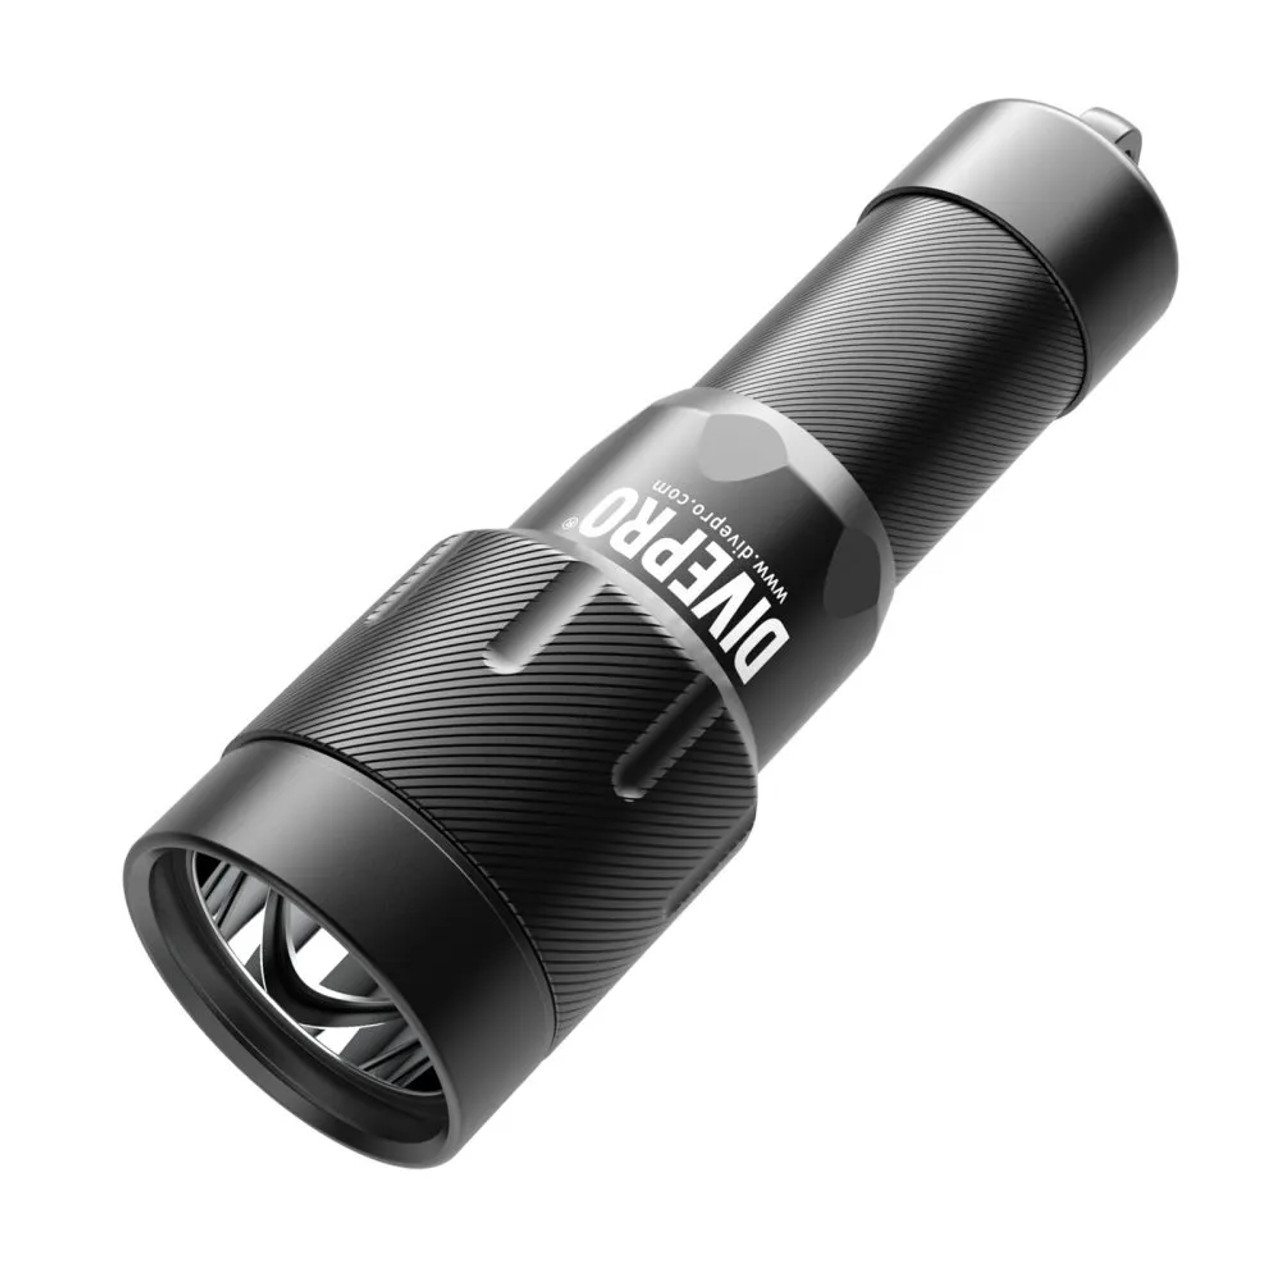 DivePro D18 -"Powerful and Long Shot" (1800LM)